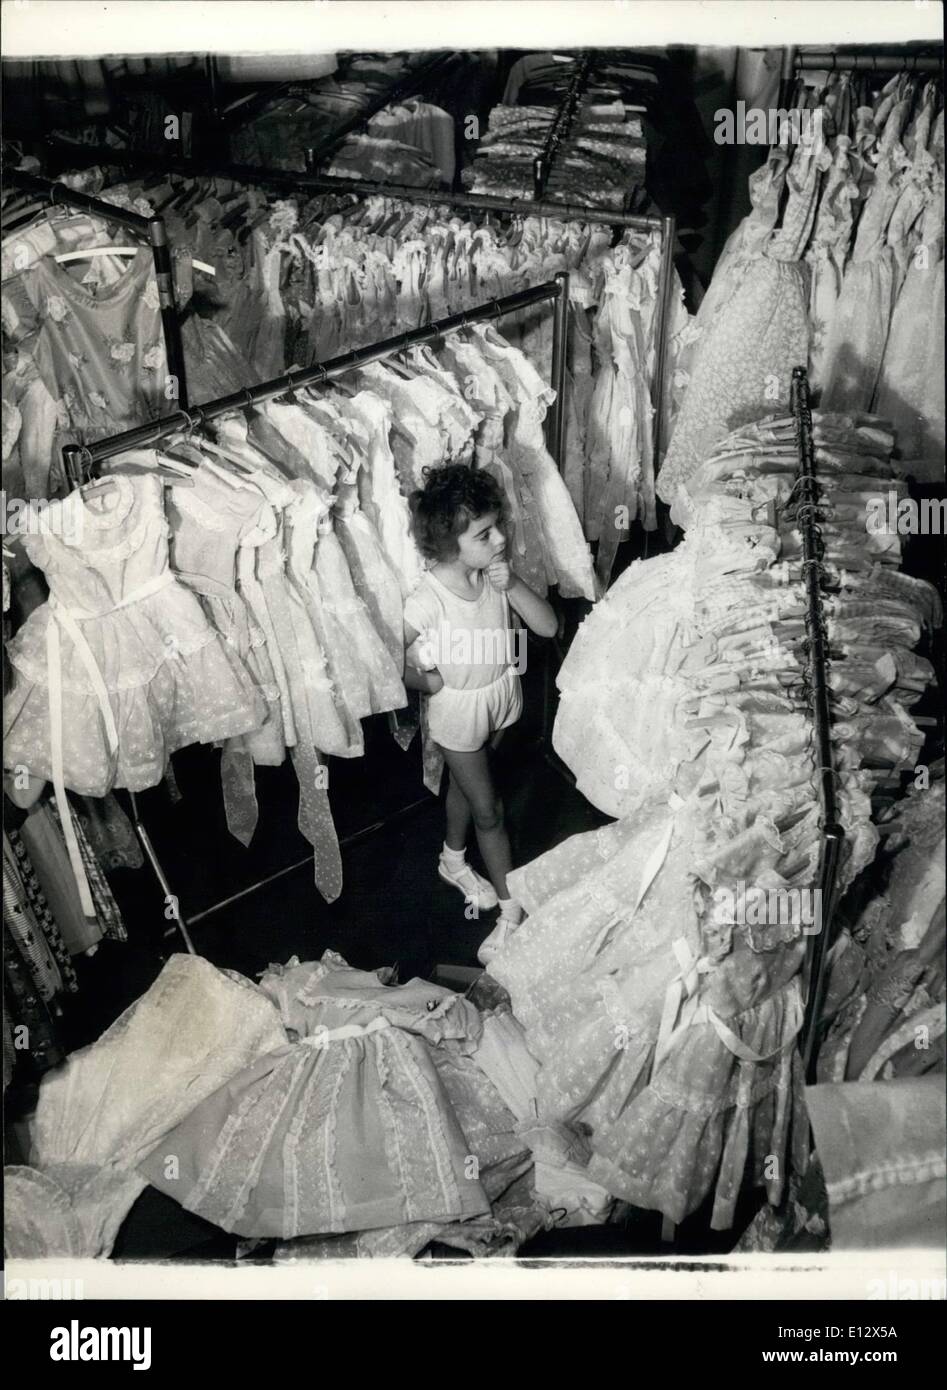 Feb. 26, 2012 - Little girl is a whirl Annette Patterson is surrounded by dresses, she doesn't know where to start trying them on. Stock Photo